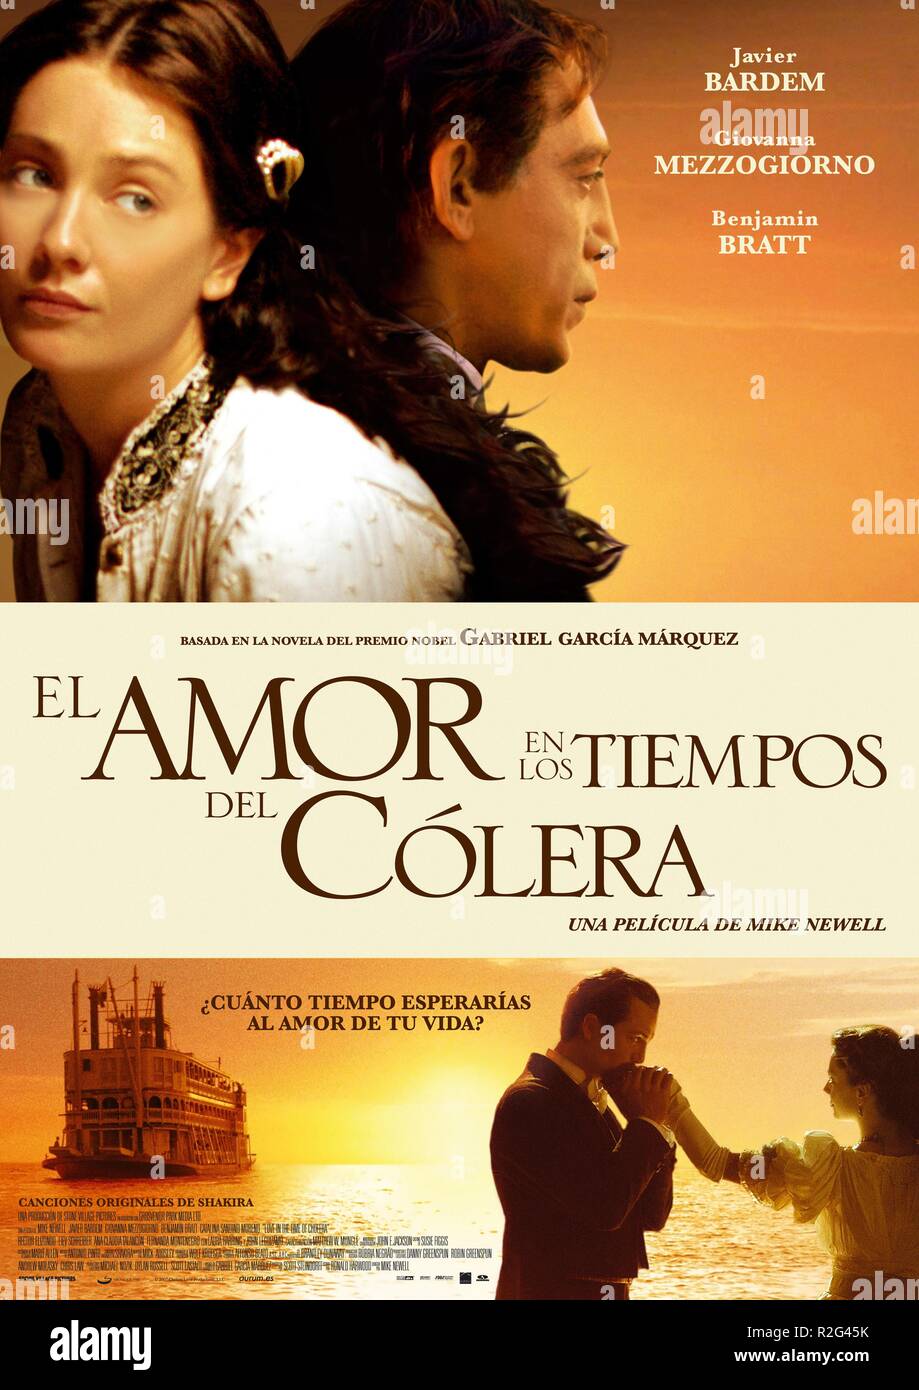 Love in the Time of Cholera  Year : 2007 USA Director : Mike Newell Giovanna Mezzogiorno, Javier Bardem  Movie poster (Sp) Stock Photo